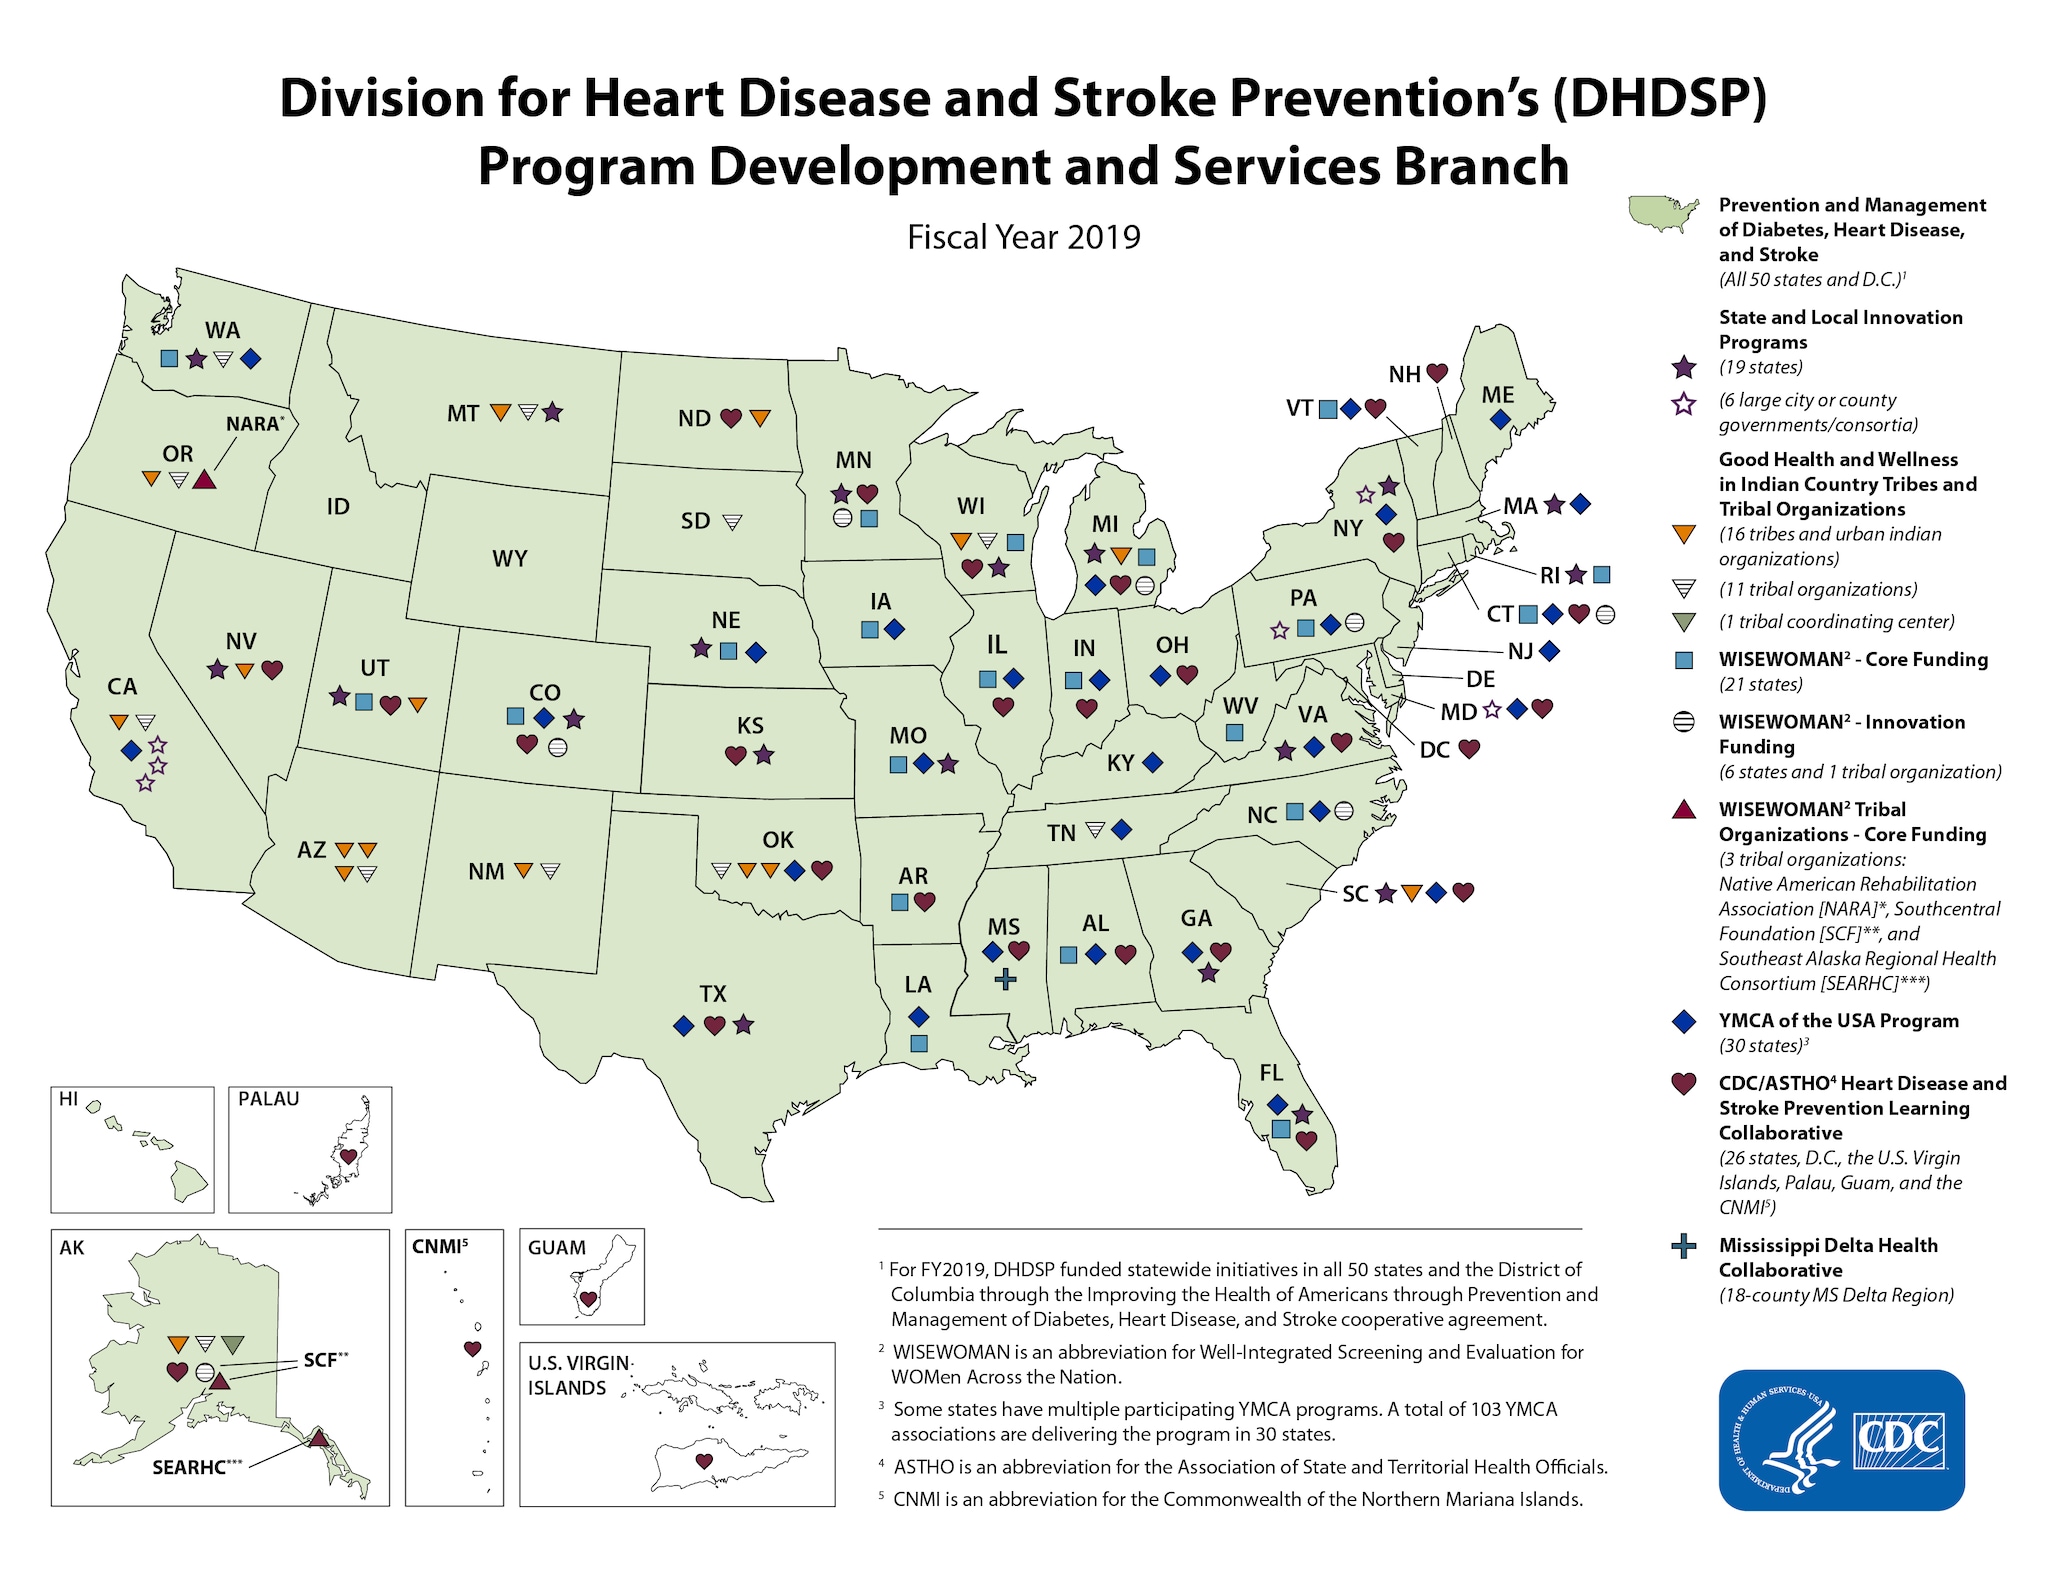 This map of the continental United States, Alaska, and Hawaii shows the range of Division of Heart Disease and Stroke Prevention Programs for fiscal year 2019. In FY 2019, DHDSP funded statewide initiatives in all 50 states and the District of Columbia to prevent, manage, and reduce risk factors associated with heart disease and stroke.